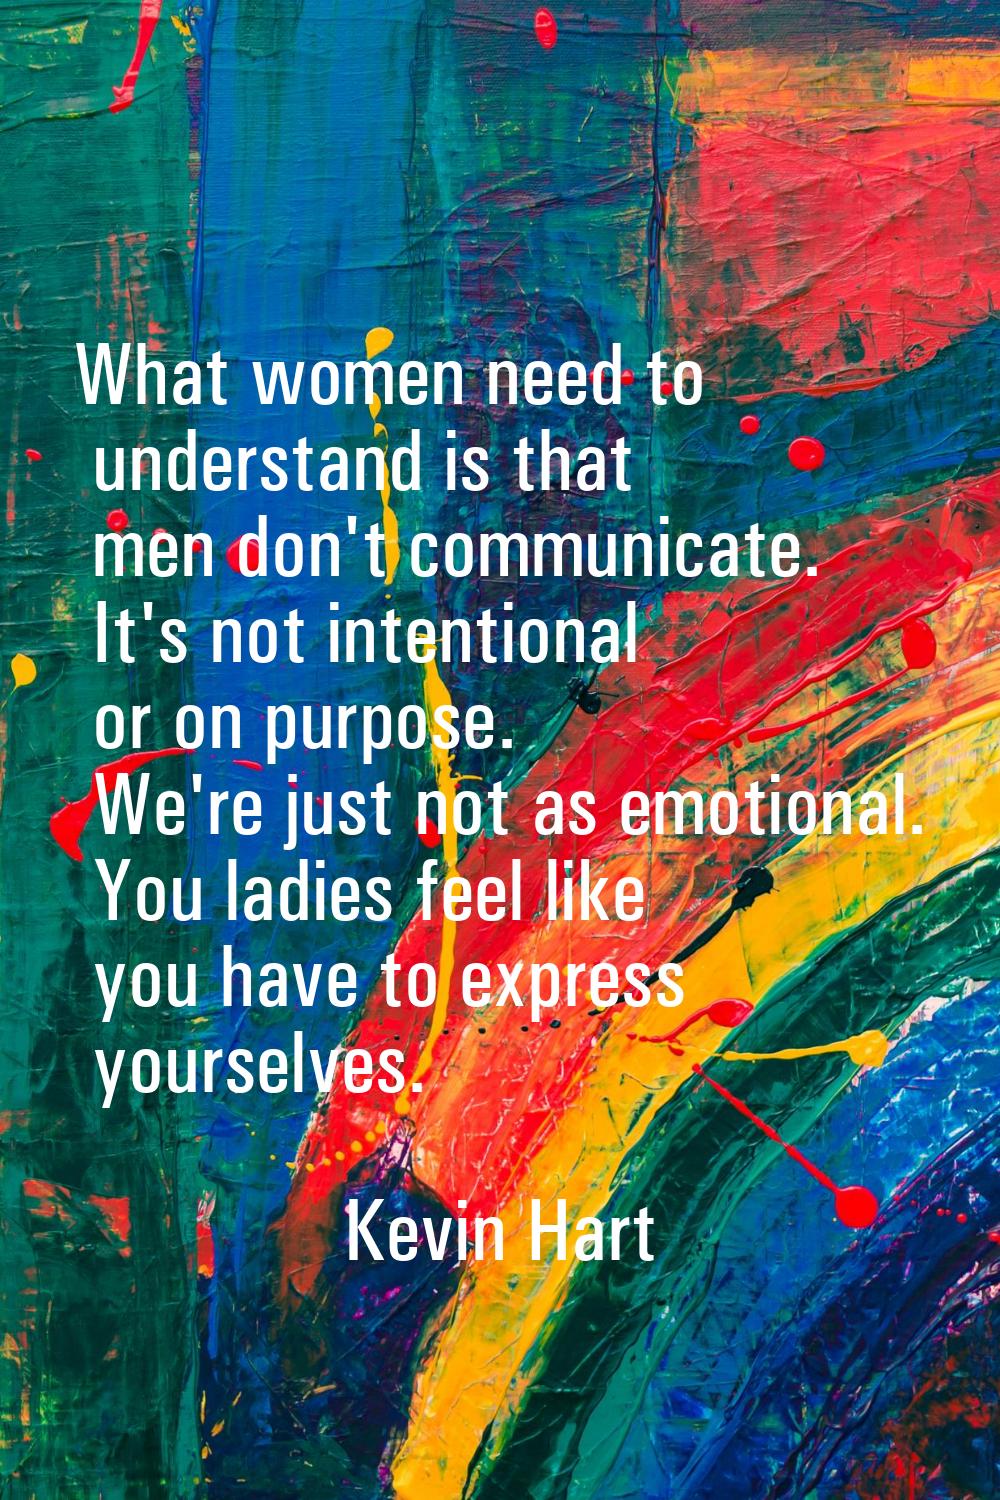 What women need to understand is that men don't communicate. It's not intentional or on purpose. We